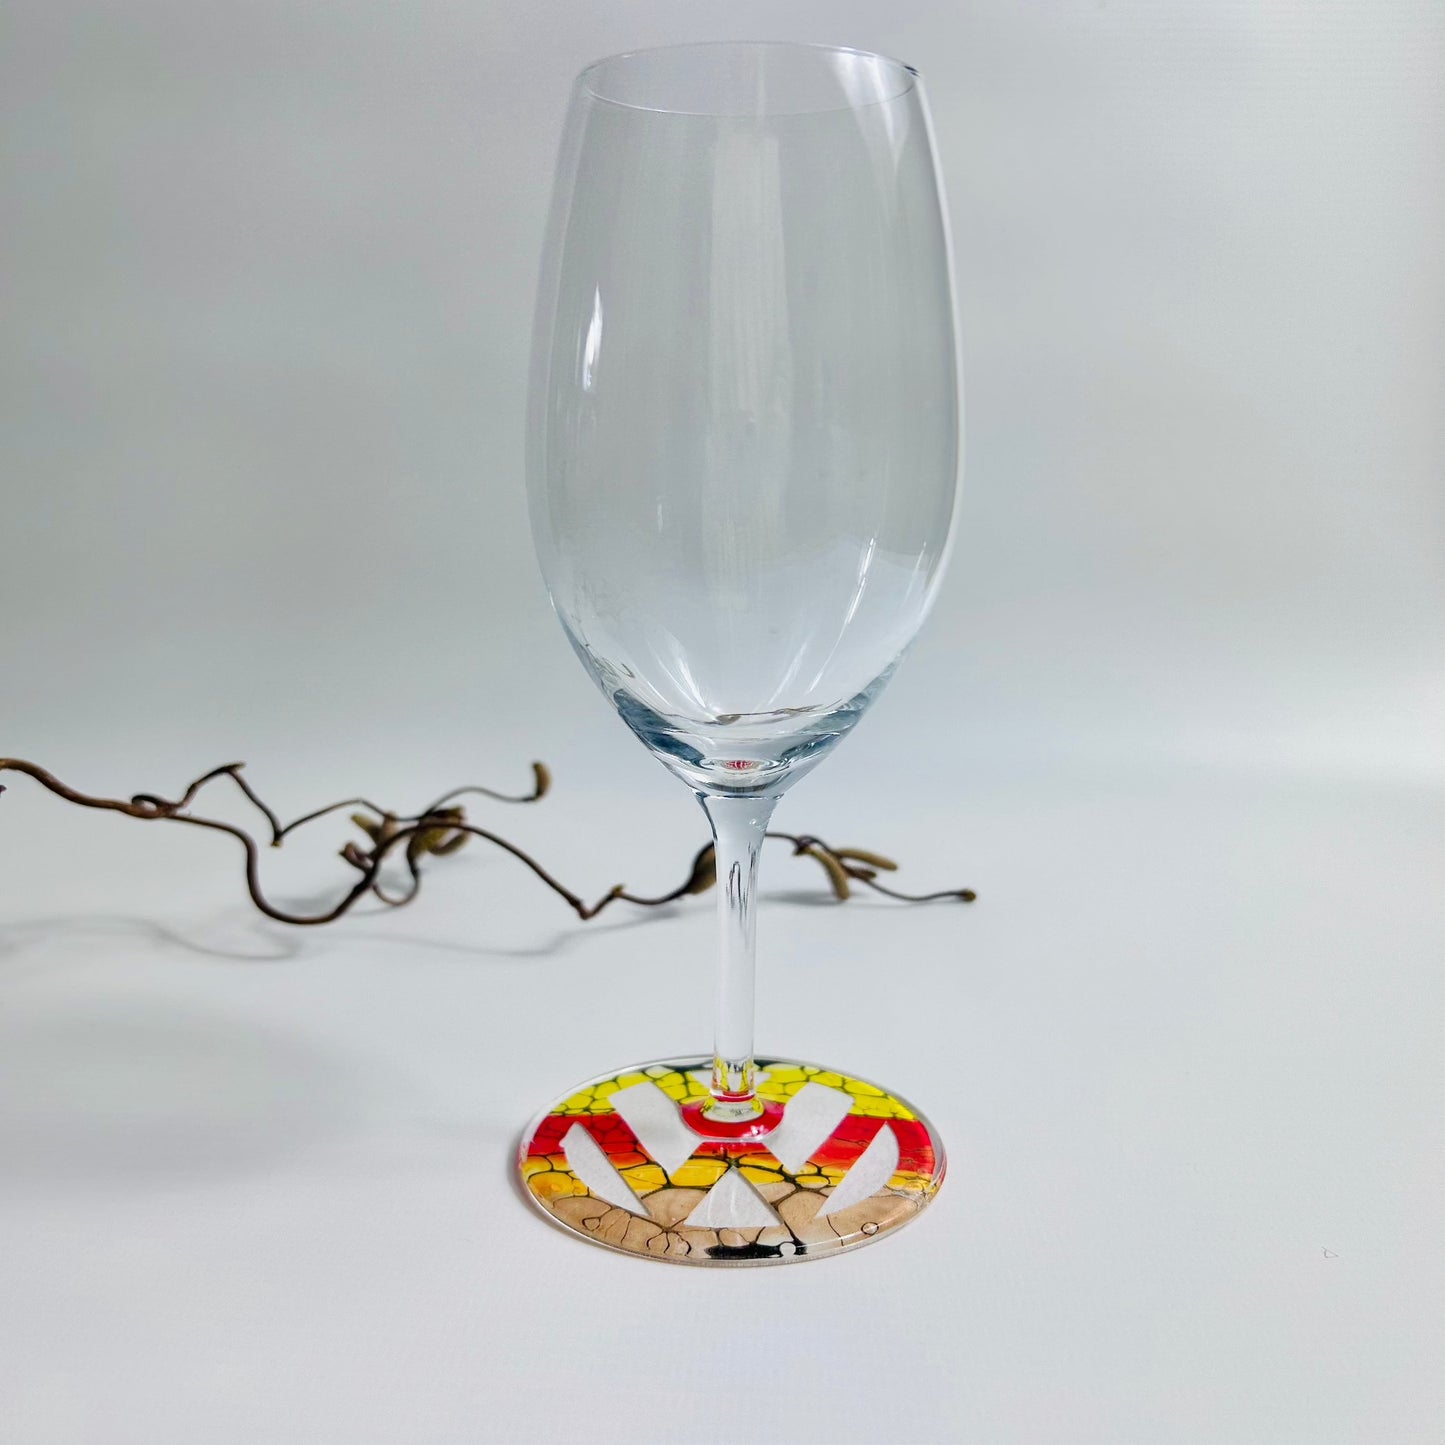 Prosecco glass with yellow and red fluid art design logo on the base, sealed with resin